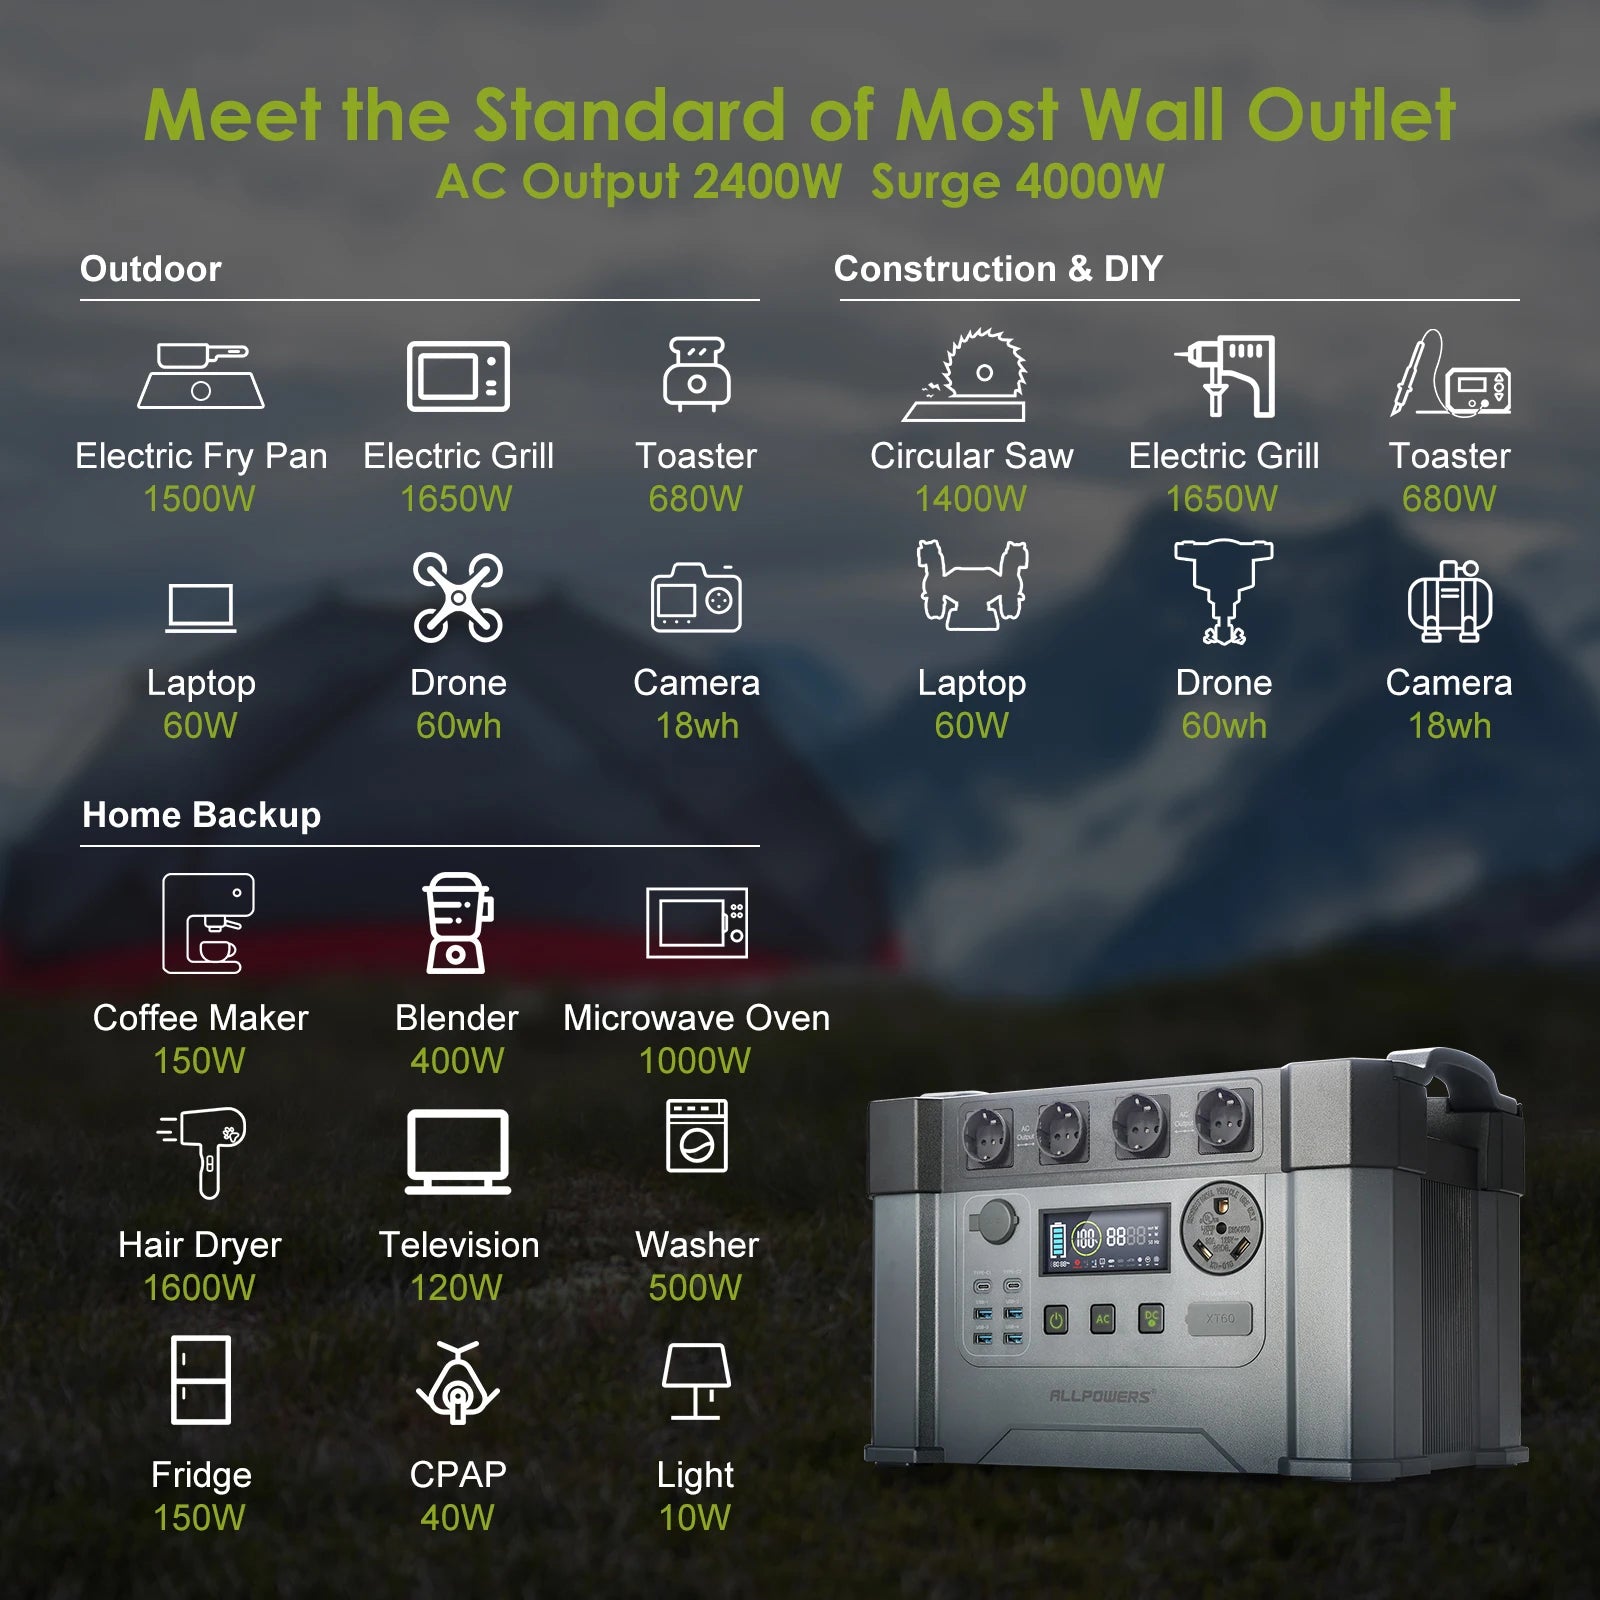 Power outdoor adventures with our portable generator's 2400W AC output.